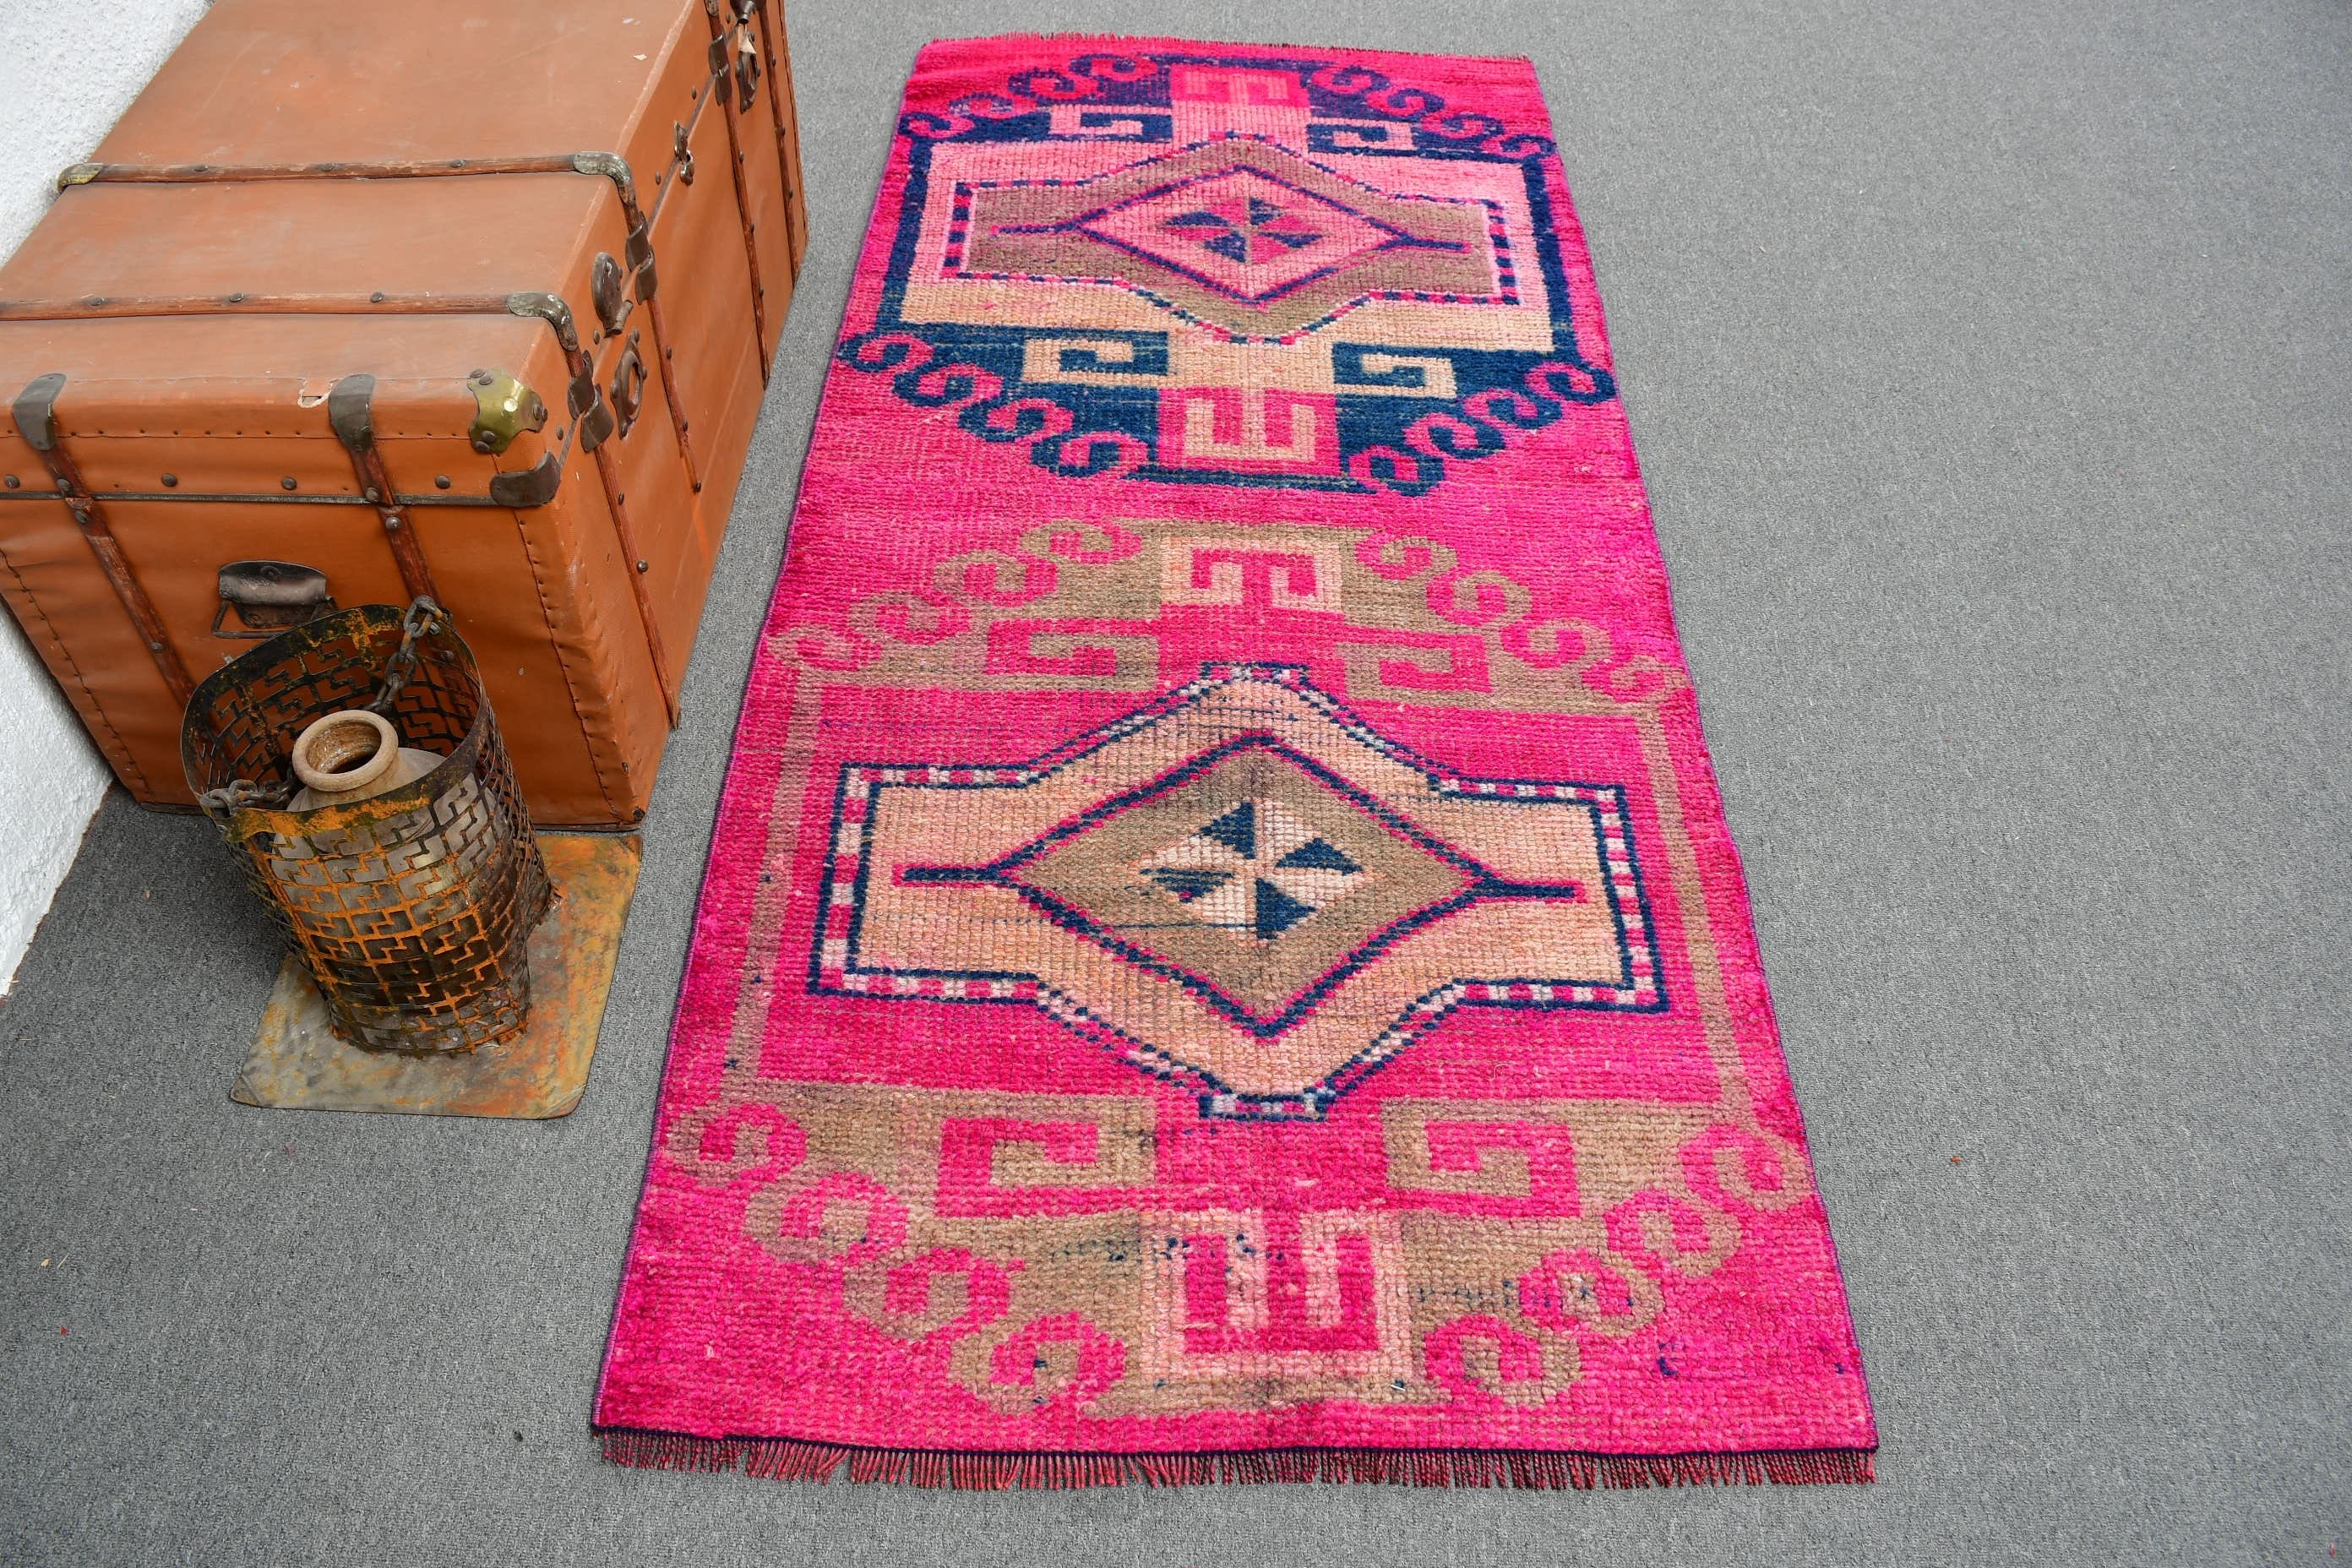 Turkish Rugs, Pink Moroccan Rug, Moroccan Rugs, Entry Rugs, Nursery Rugs, Vintage Rugs, Handwoven Rug, 3.1x6.9 ft Accent Rugs, Oushak Rug